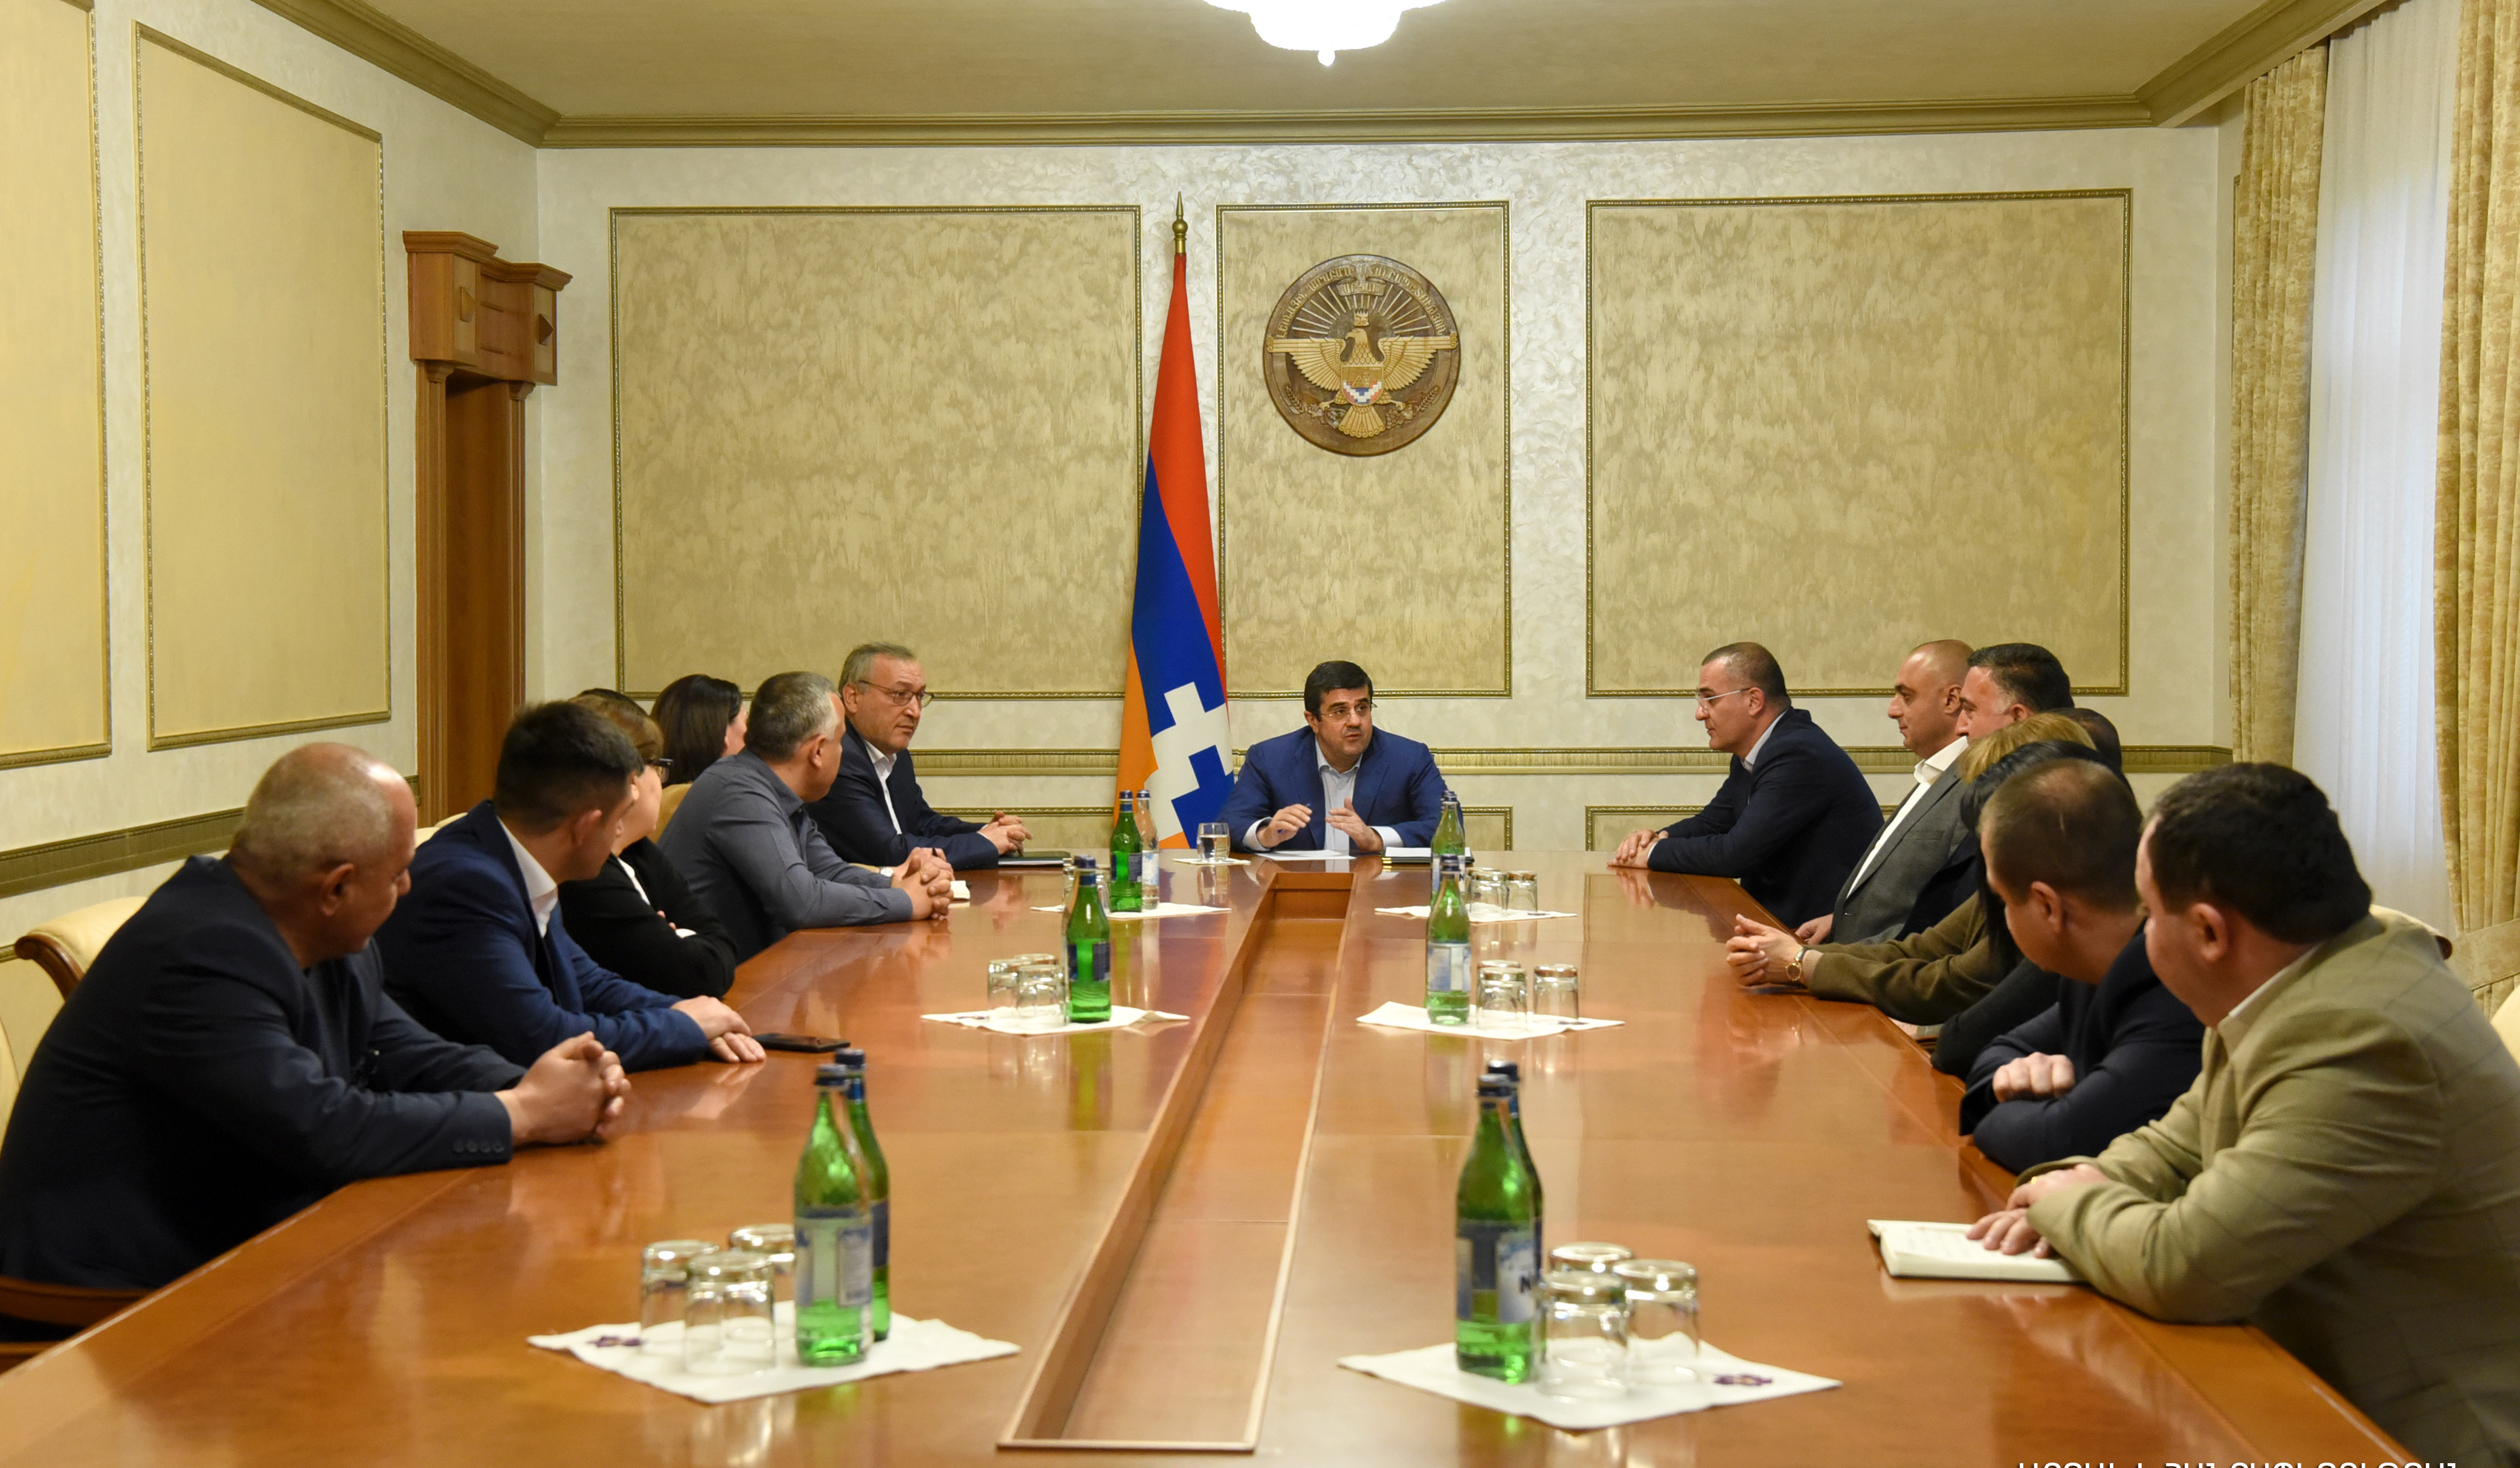 Issues related to internal and external challenges facing Artsakh discussed